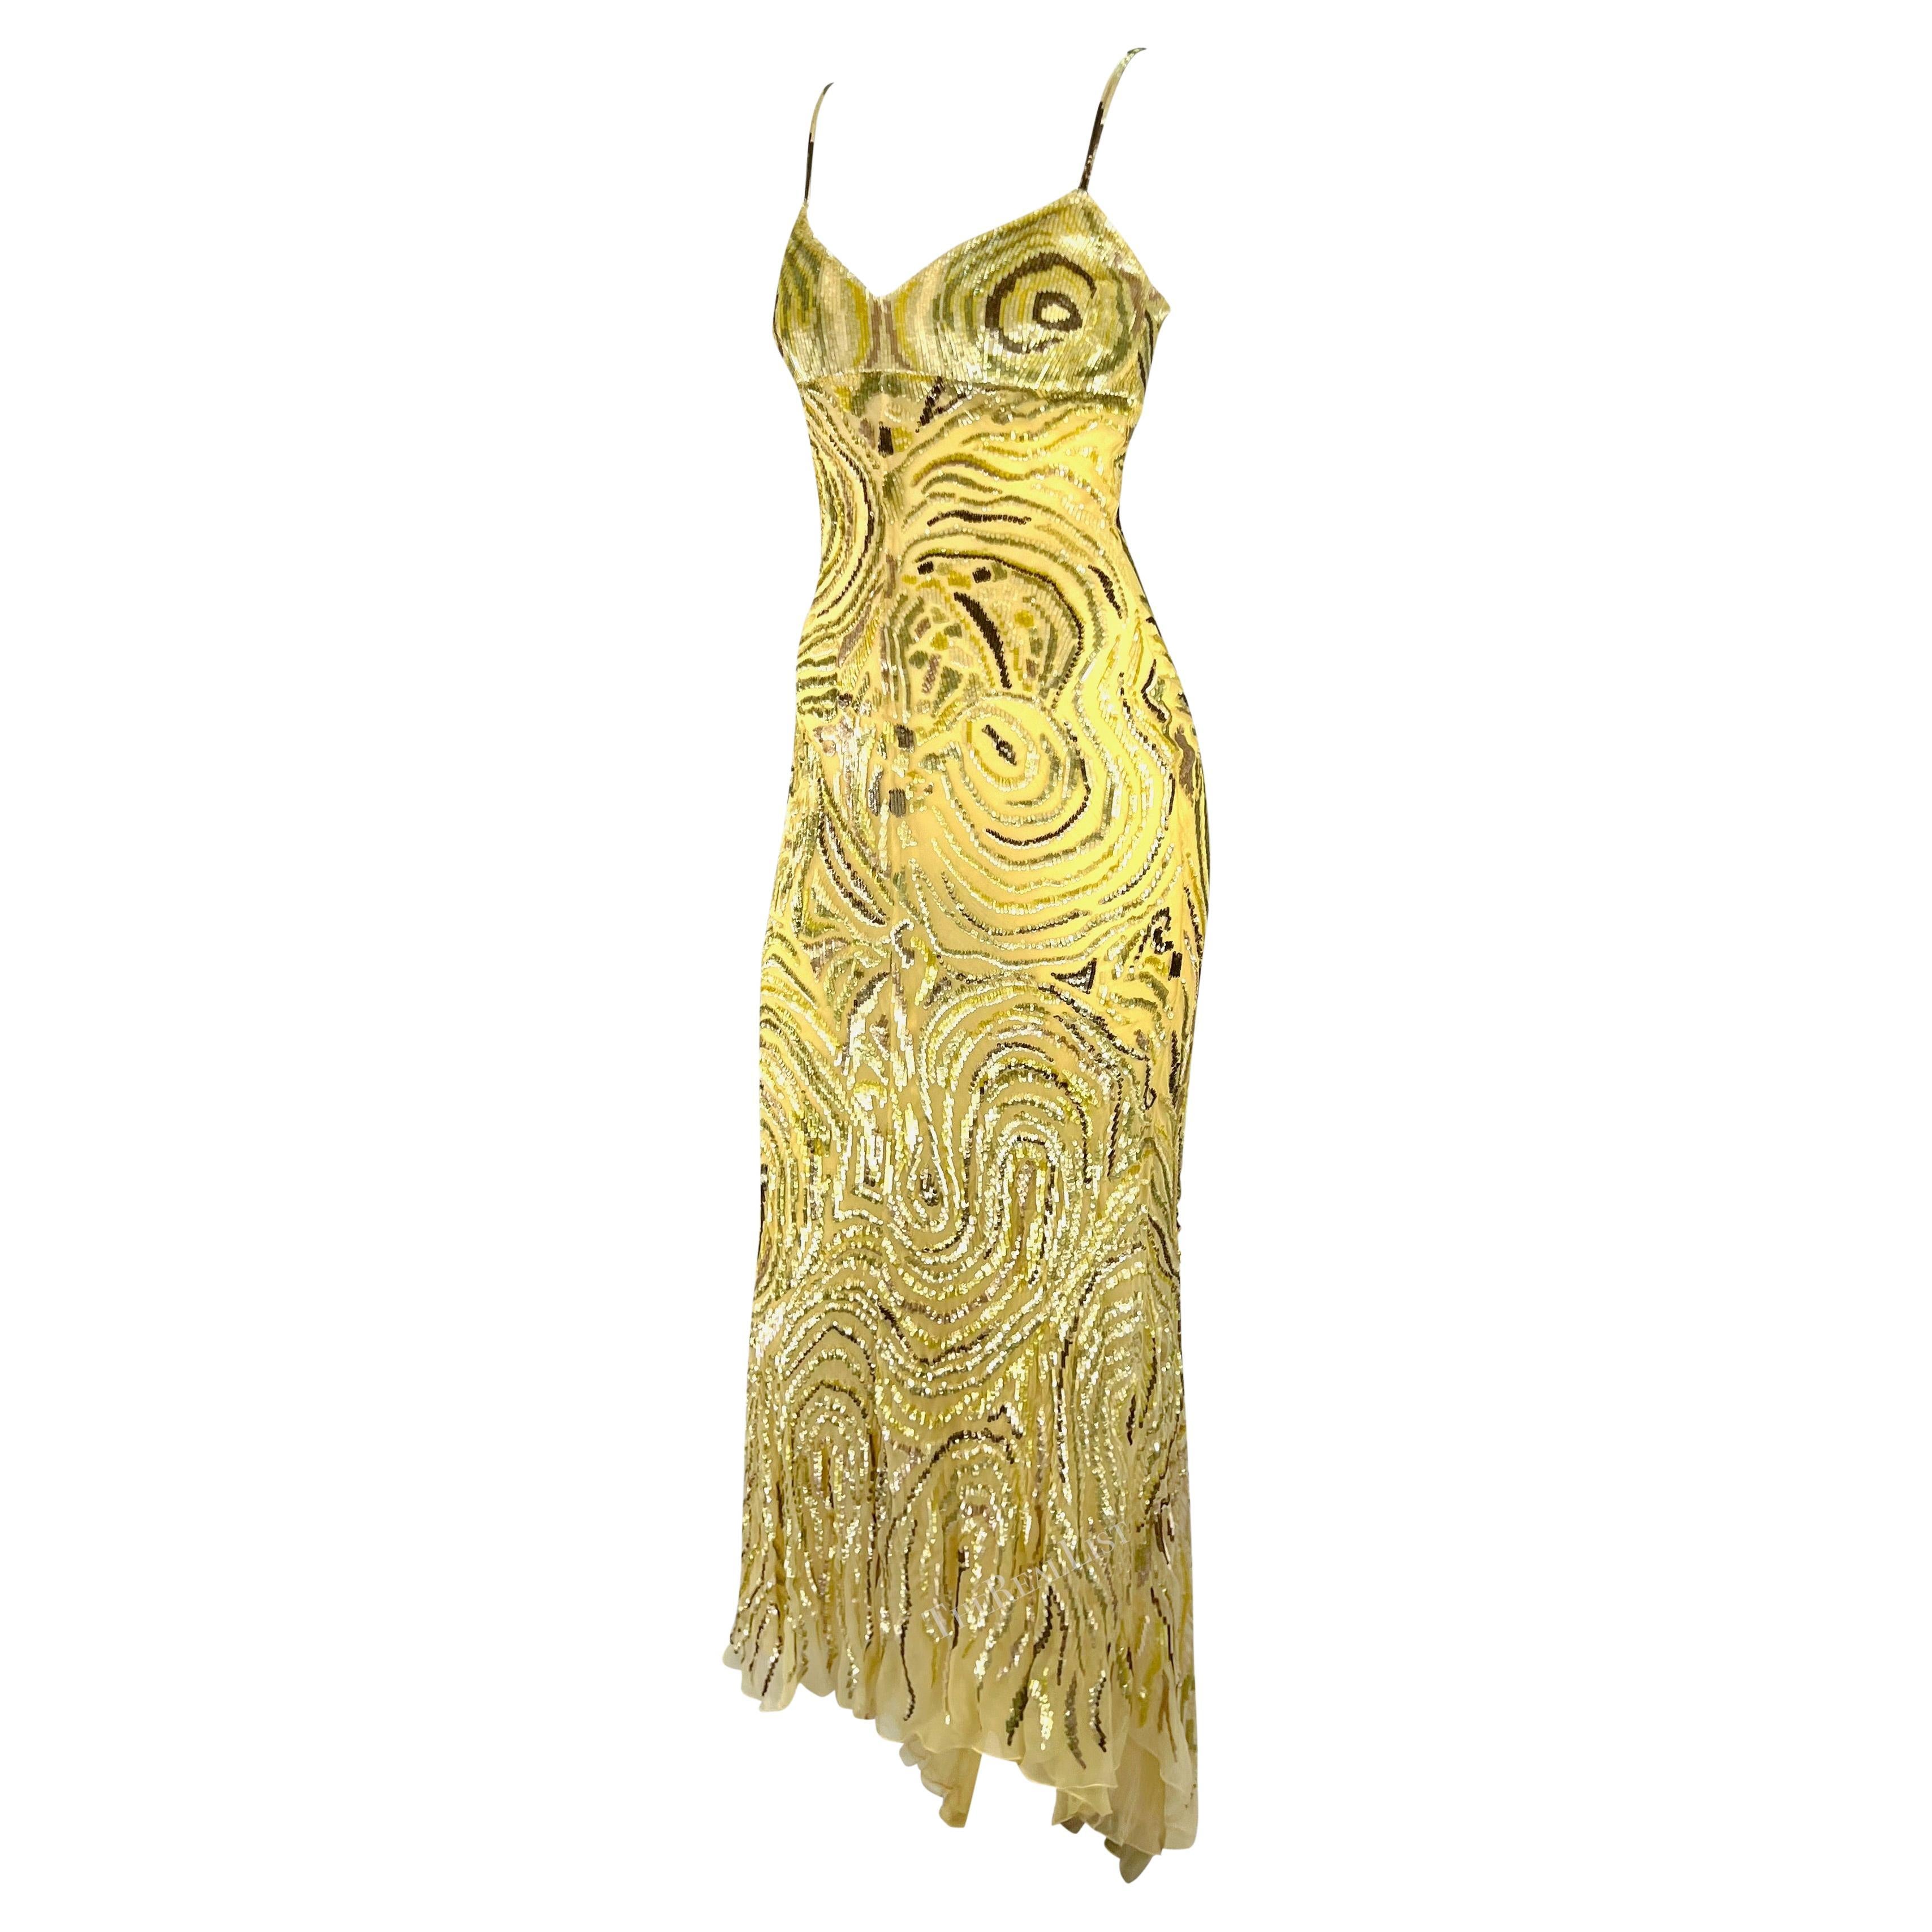 S/S 1997 Valentino Garavani Runway Naomi Abstract Organic Form Sequin Gown For Sale 6